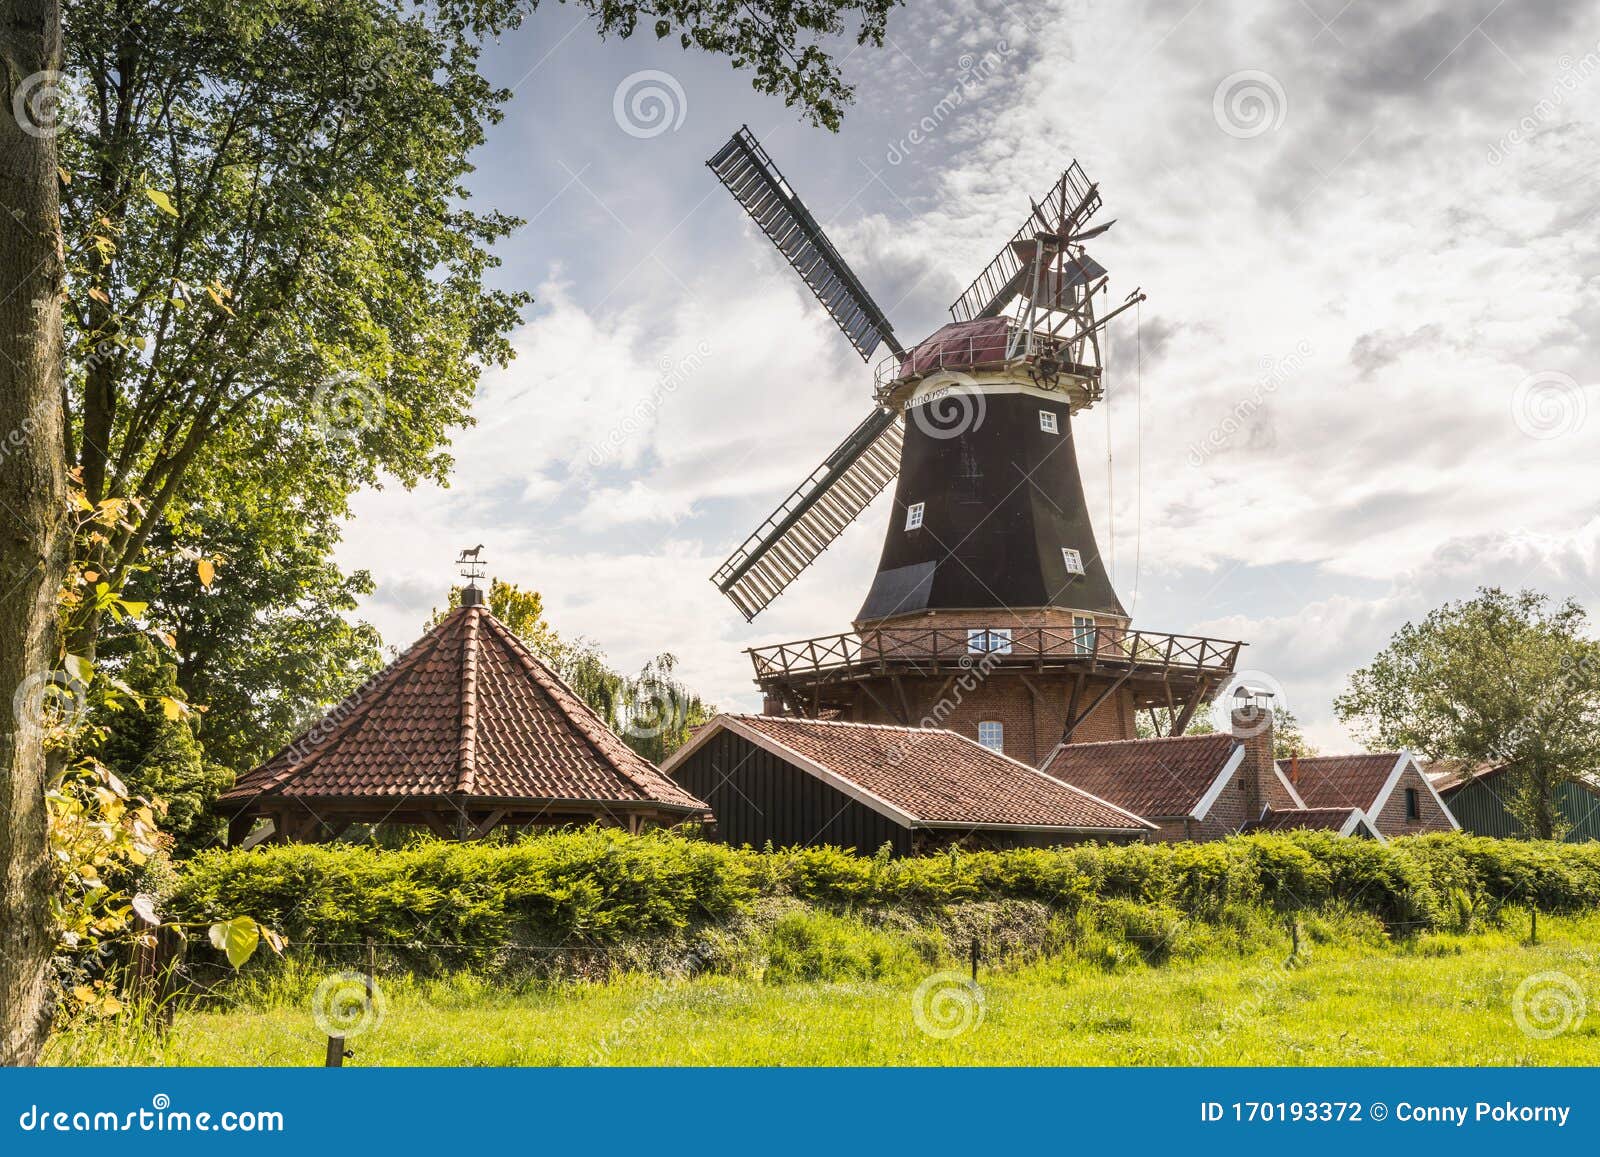 windmill rhaude in green nature in the county of leer, east frisia, lower saxony, germany